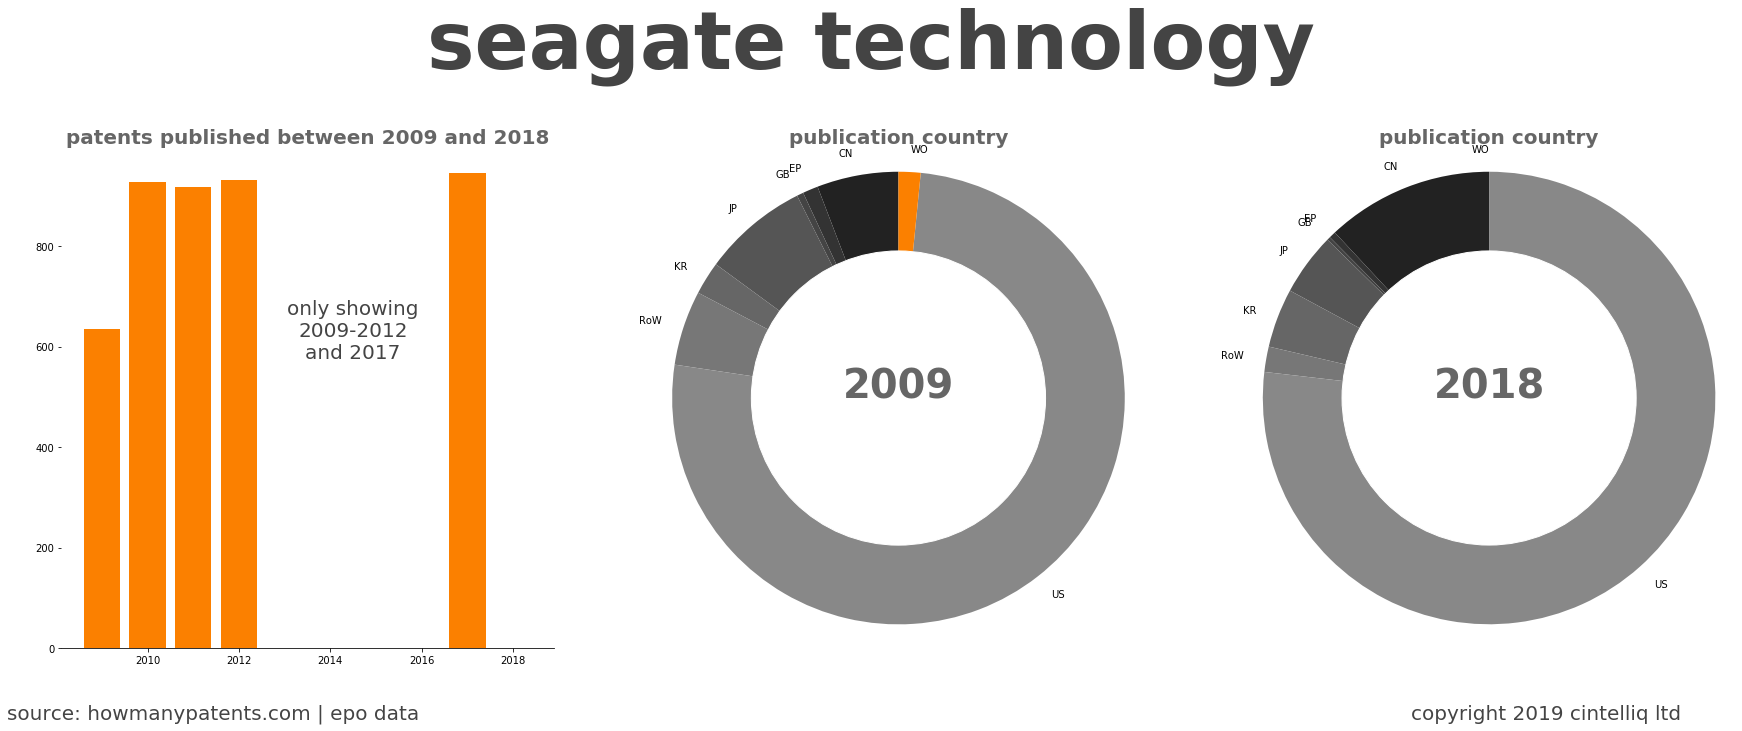 summary of patents for Seagate Technology